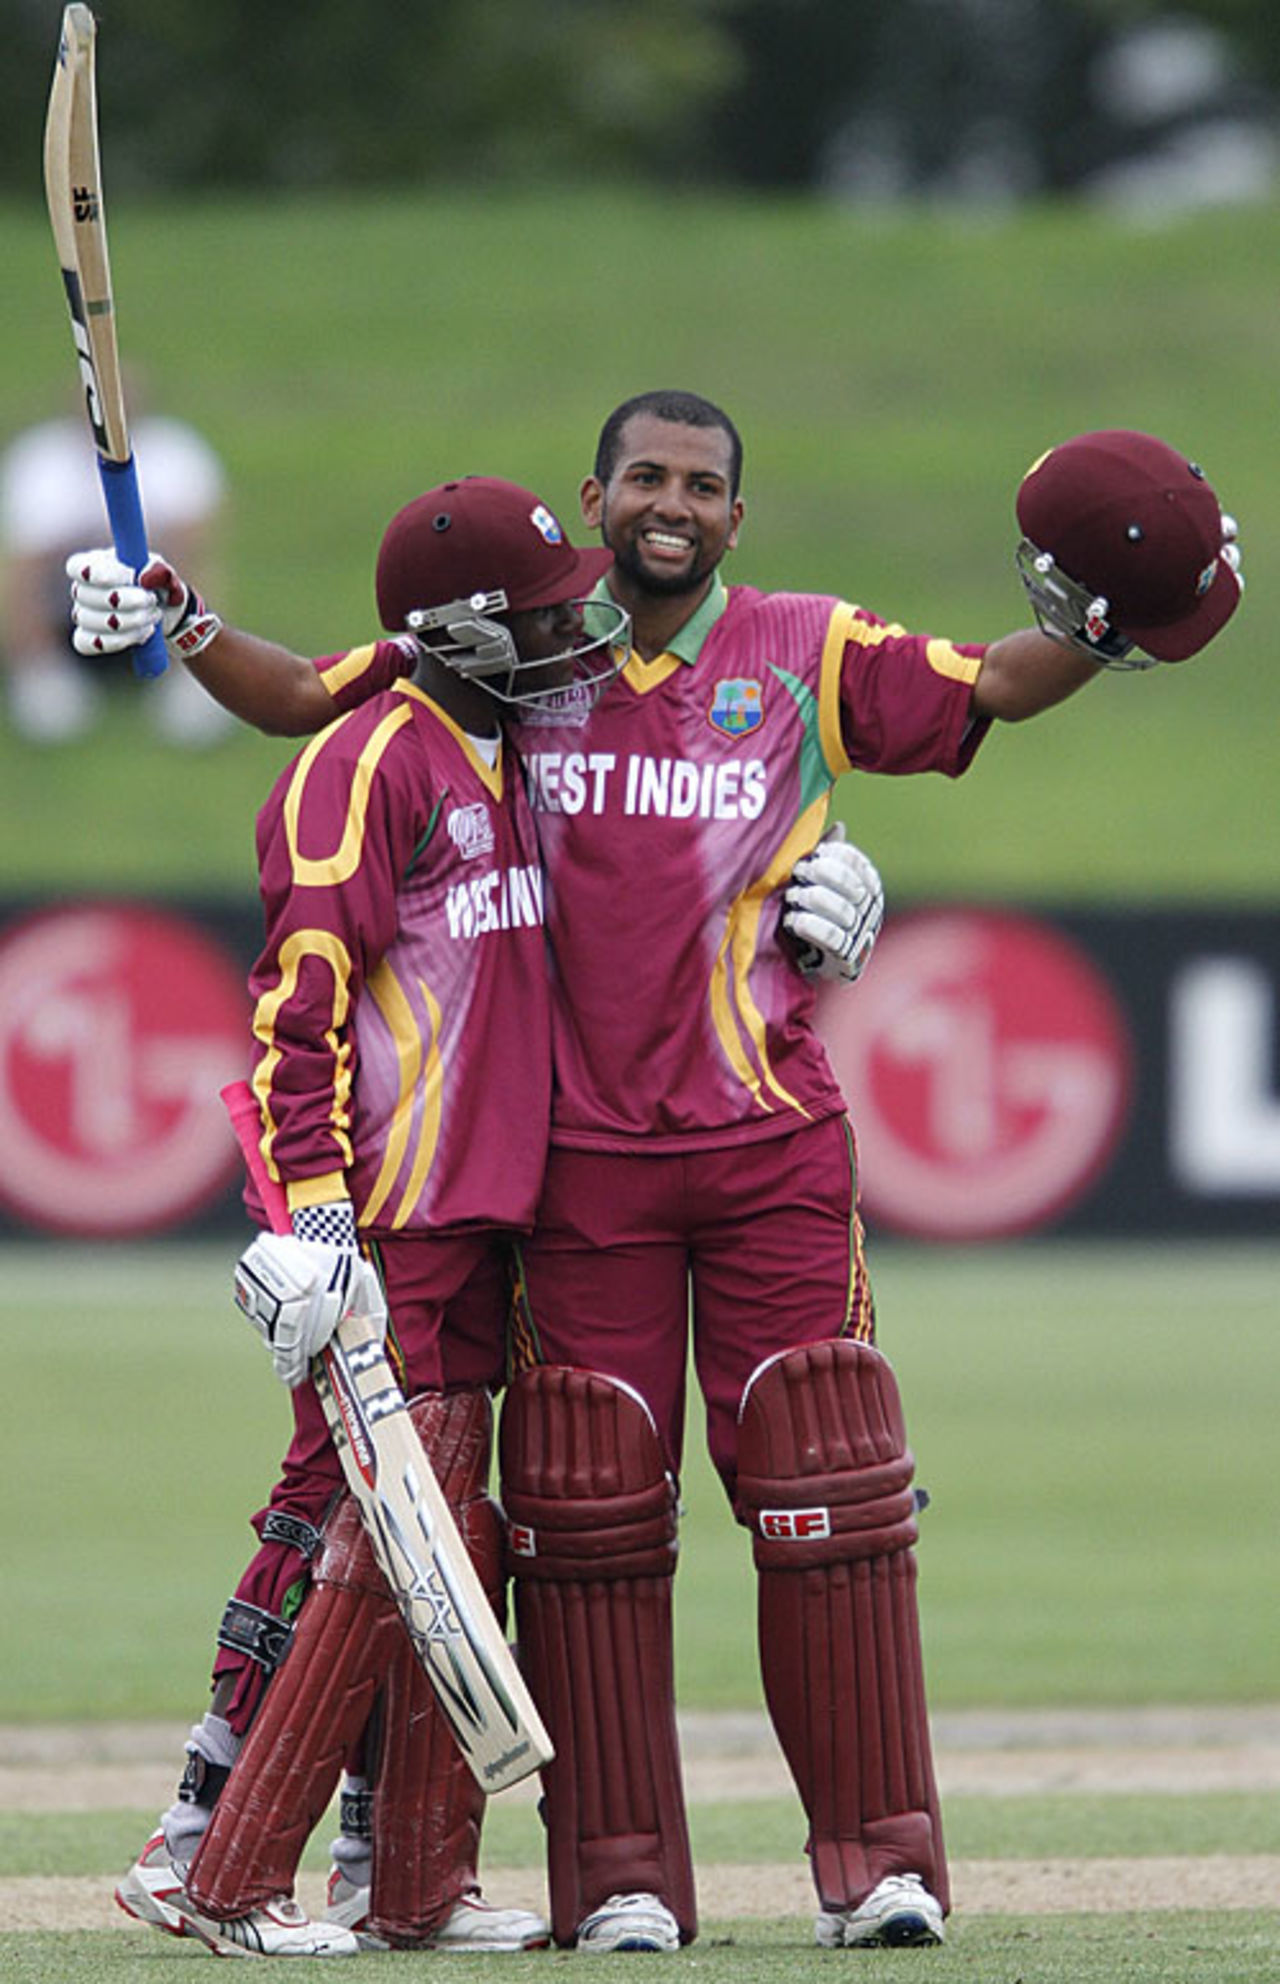 Yannic Cariah is cheered by Jermaine Blackwood on reaching his hundred, Sri Lanka v West Indies, ICC Under-19 World Cup, 3rd place play-off, Christchurch, 29 January, 2010